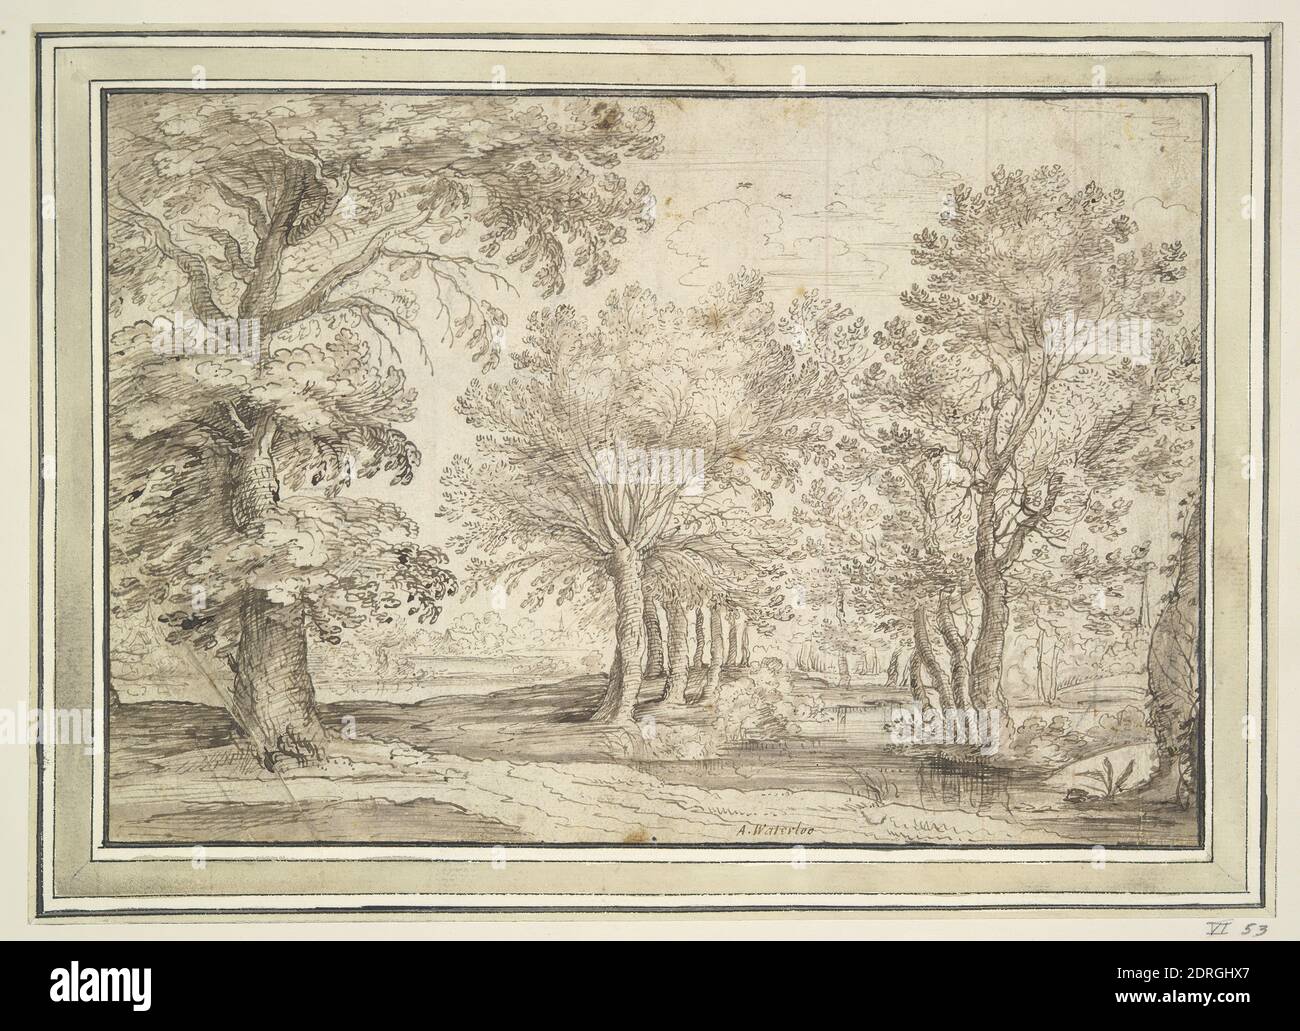 After: Denis van Alsloot, Flemish, 1570-1628, Trees onmarshy ground, Pen and brown ink and brown wash over sketch in black chalk, Sheet: 18.7 × 27.3 cm (7 3/8 × 10 3/4in.), Made in Flanders, Flemish, 17th century, Works on Paper - Drawings and Watercolors Stock Photo